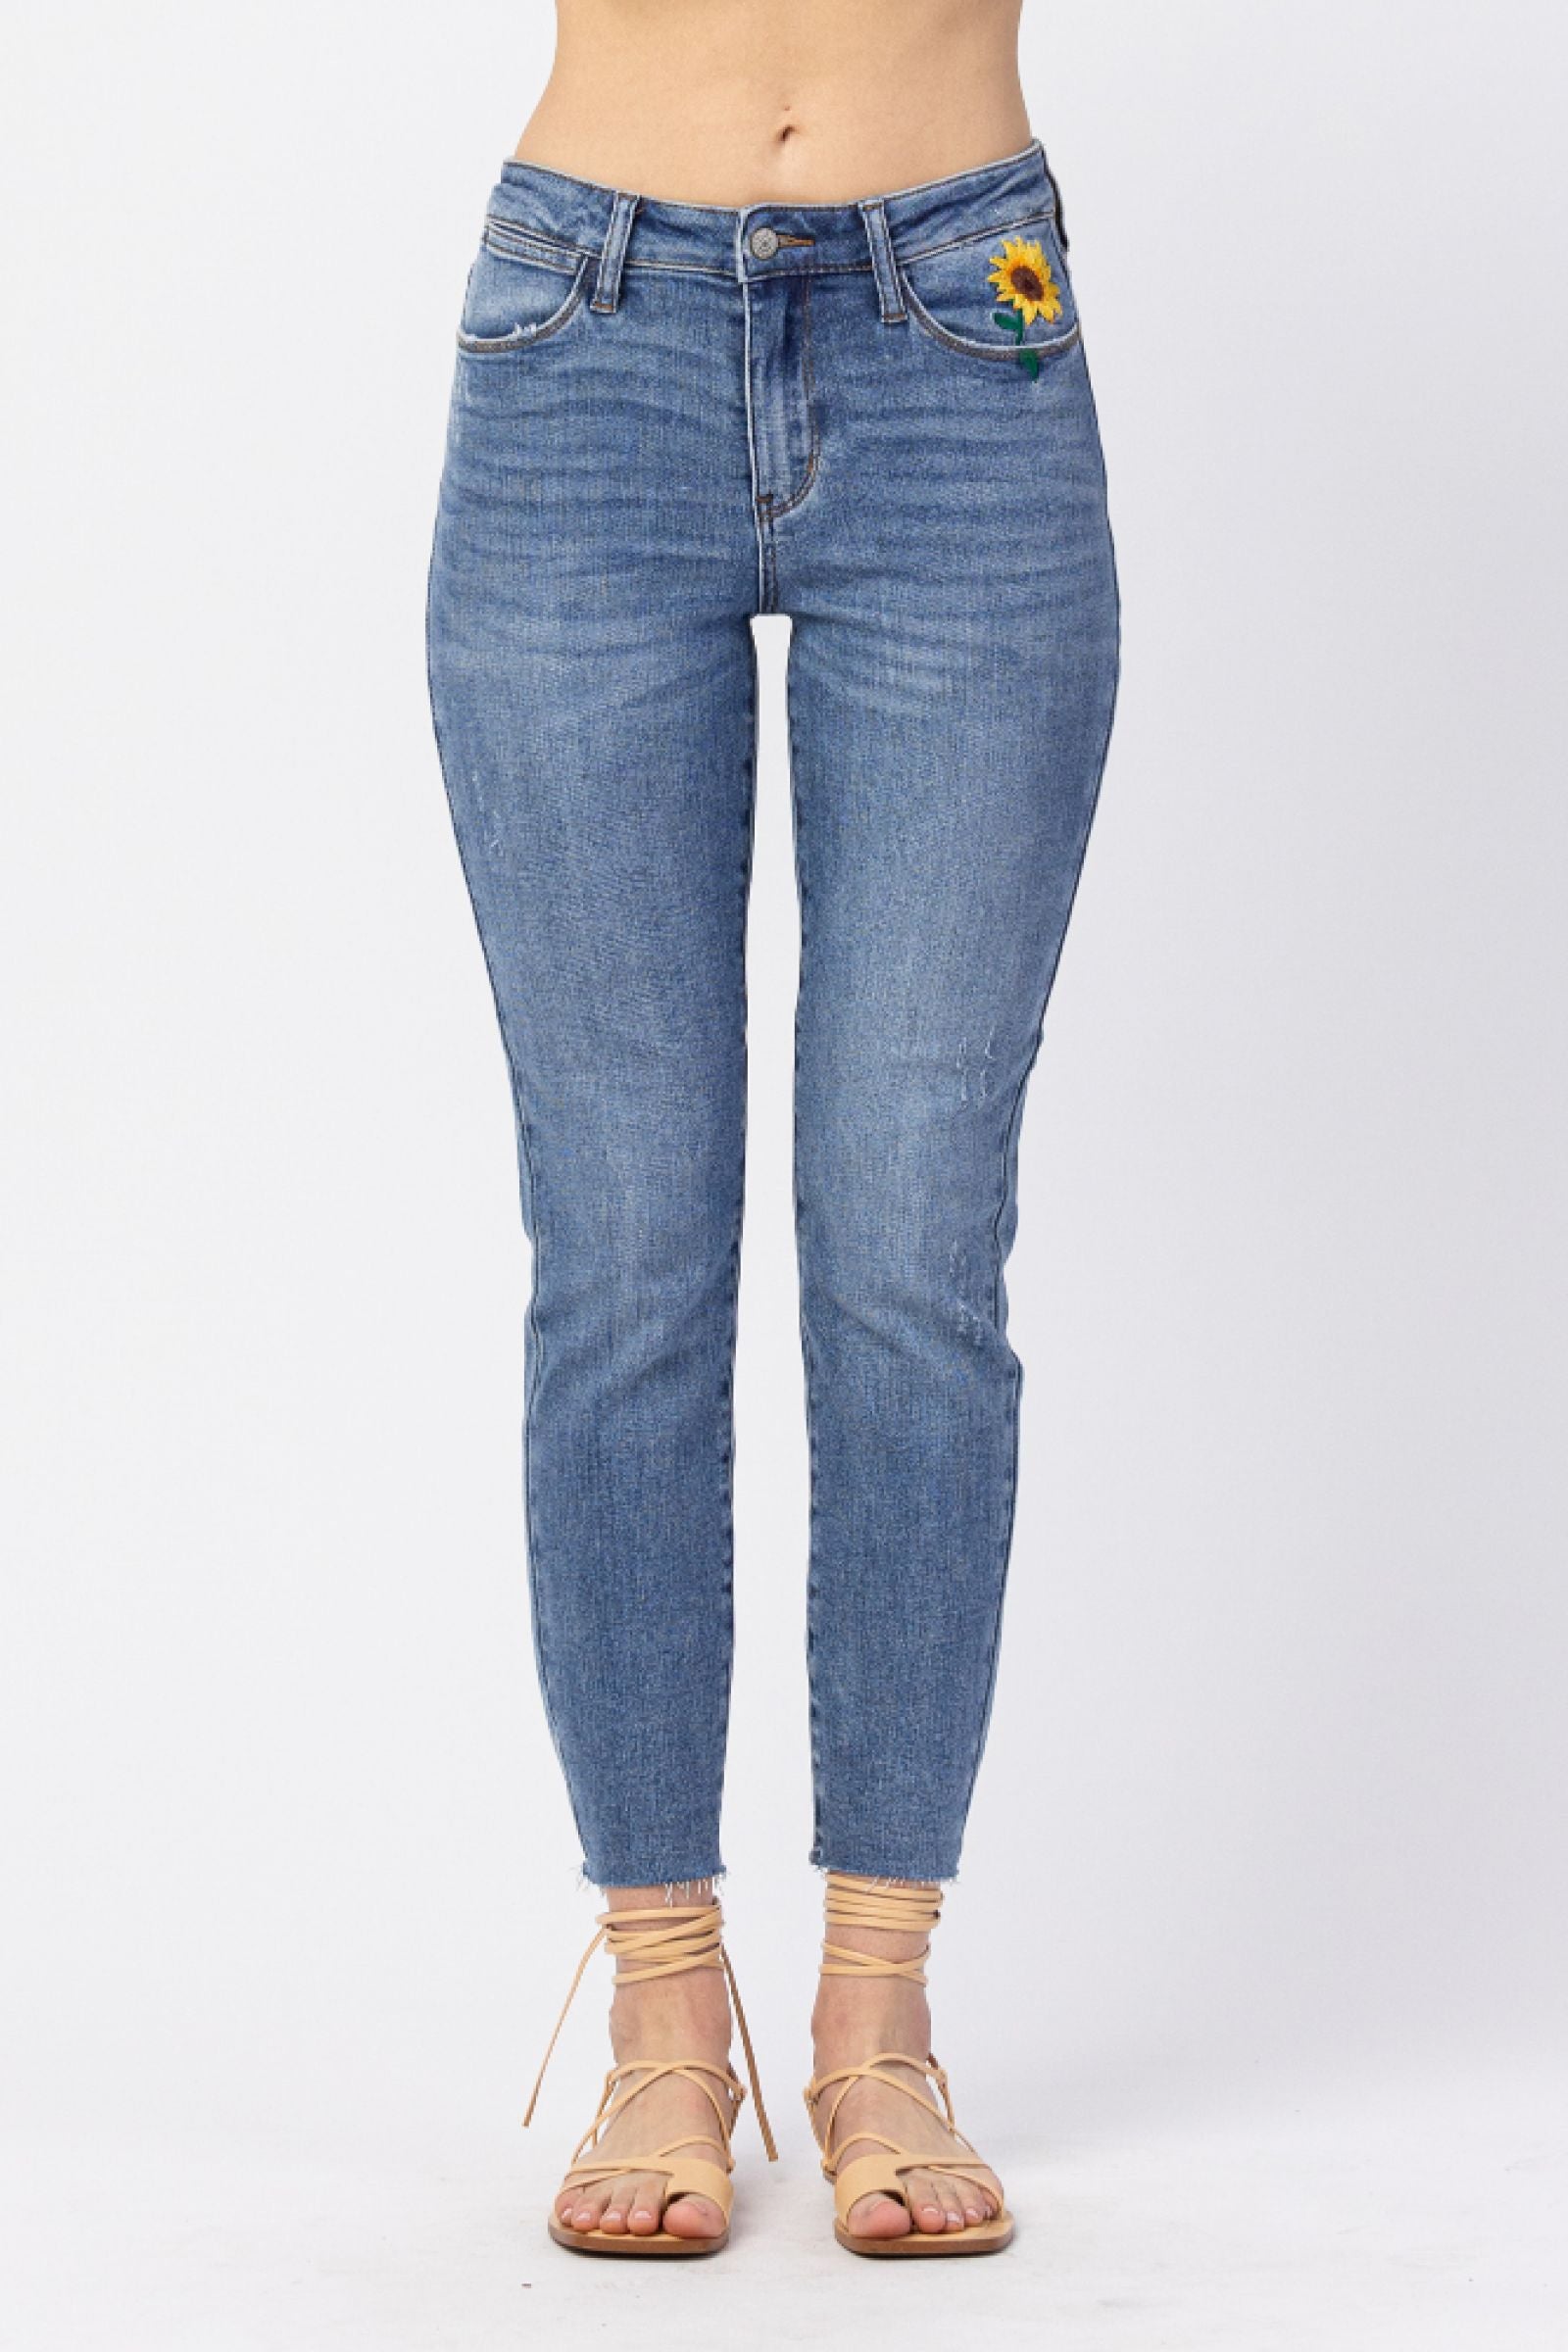 Judy Blue "Sunflower" High Rise Relaxed Fit Denim - Mid Wash